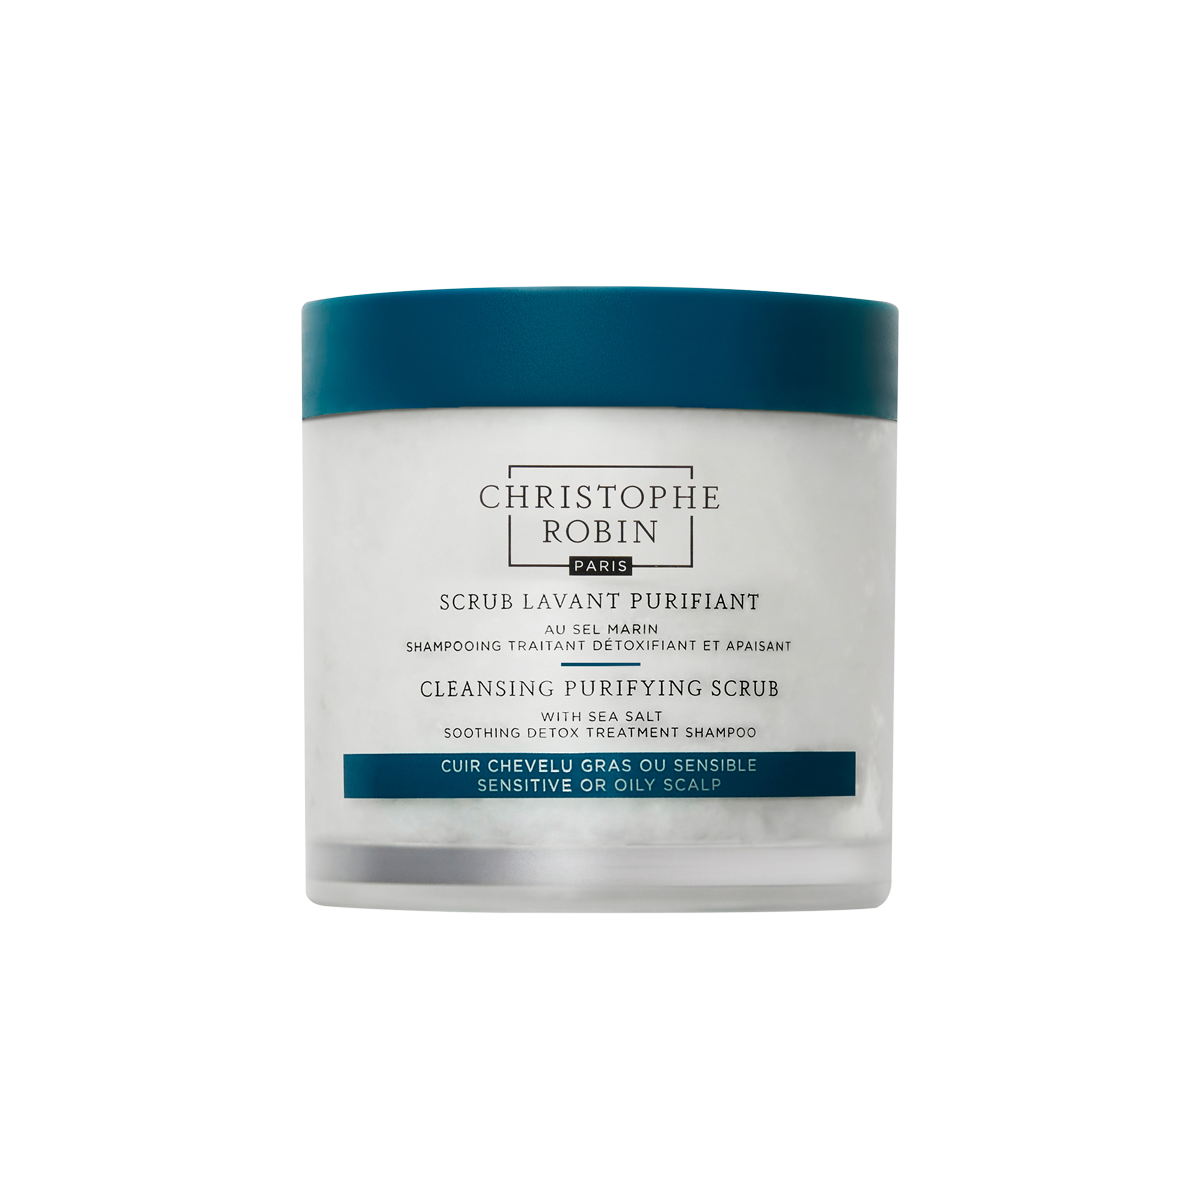 Christophe Robin - Cleansing Purifying Scrub with Sea Salt